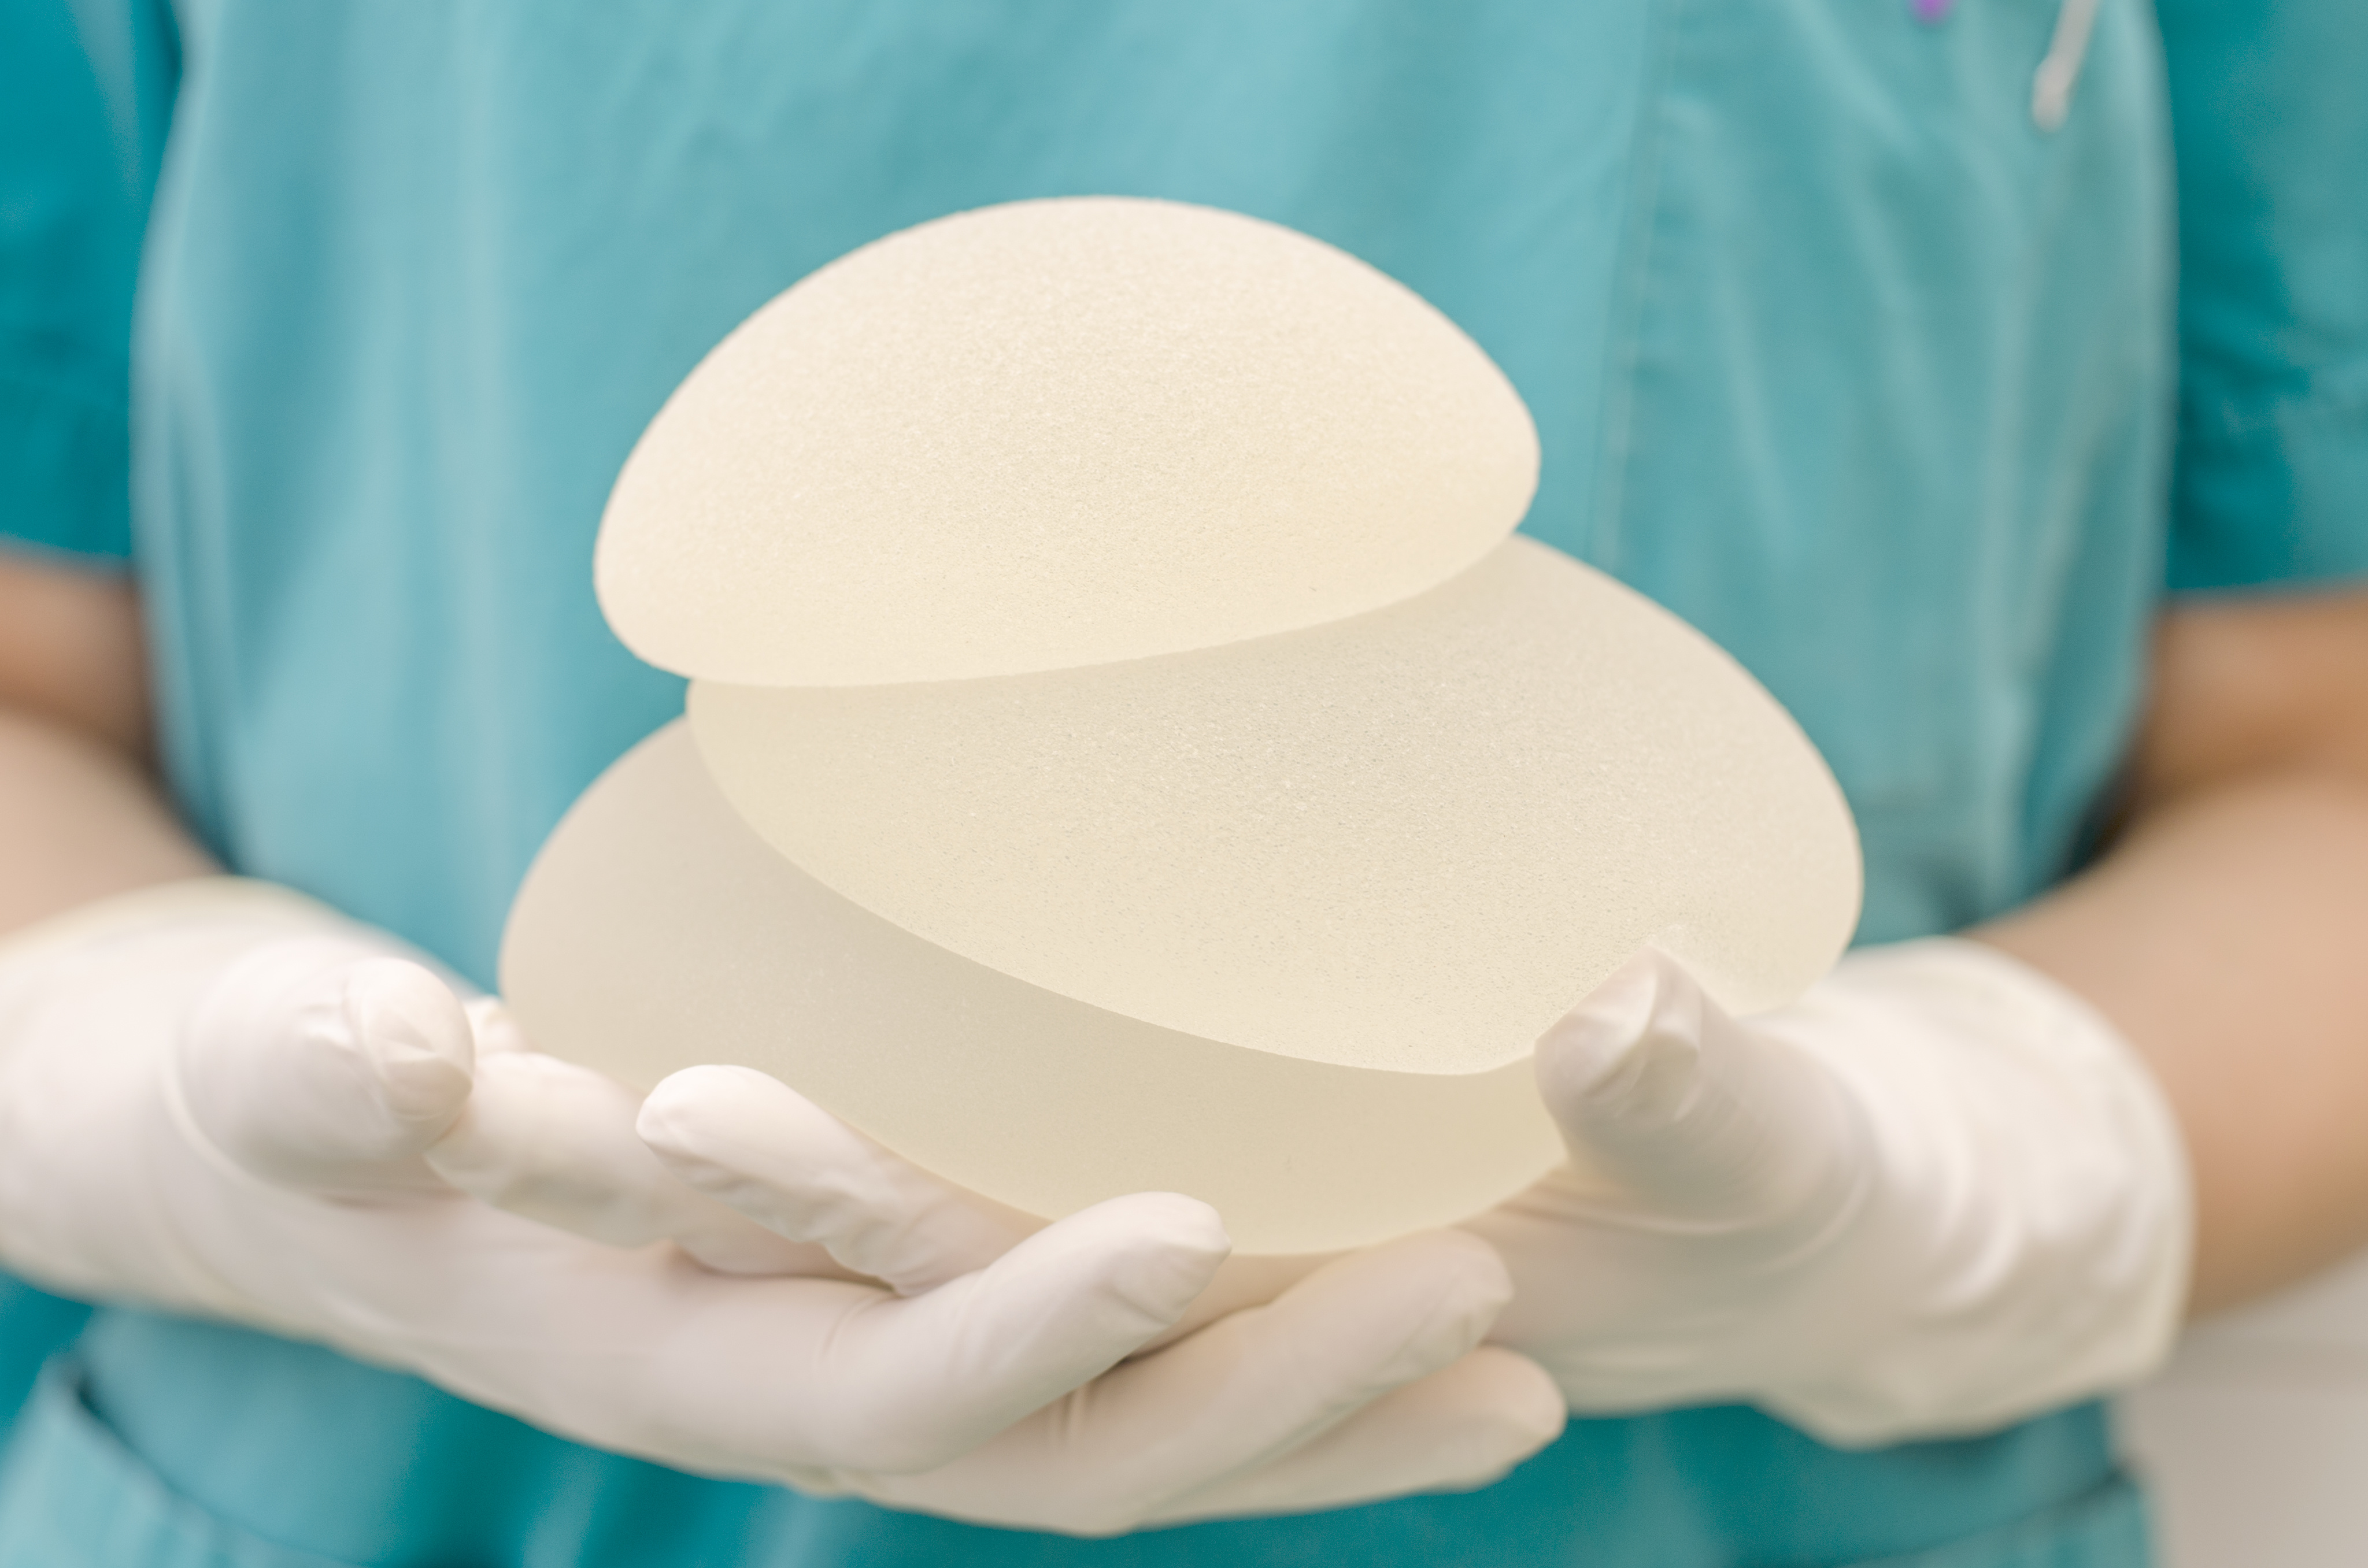 Breast Implant Illness and Breast Implant-Associated Anaplastic Large Cell Lymphoma